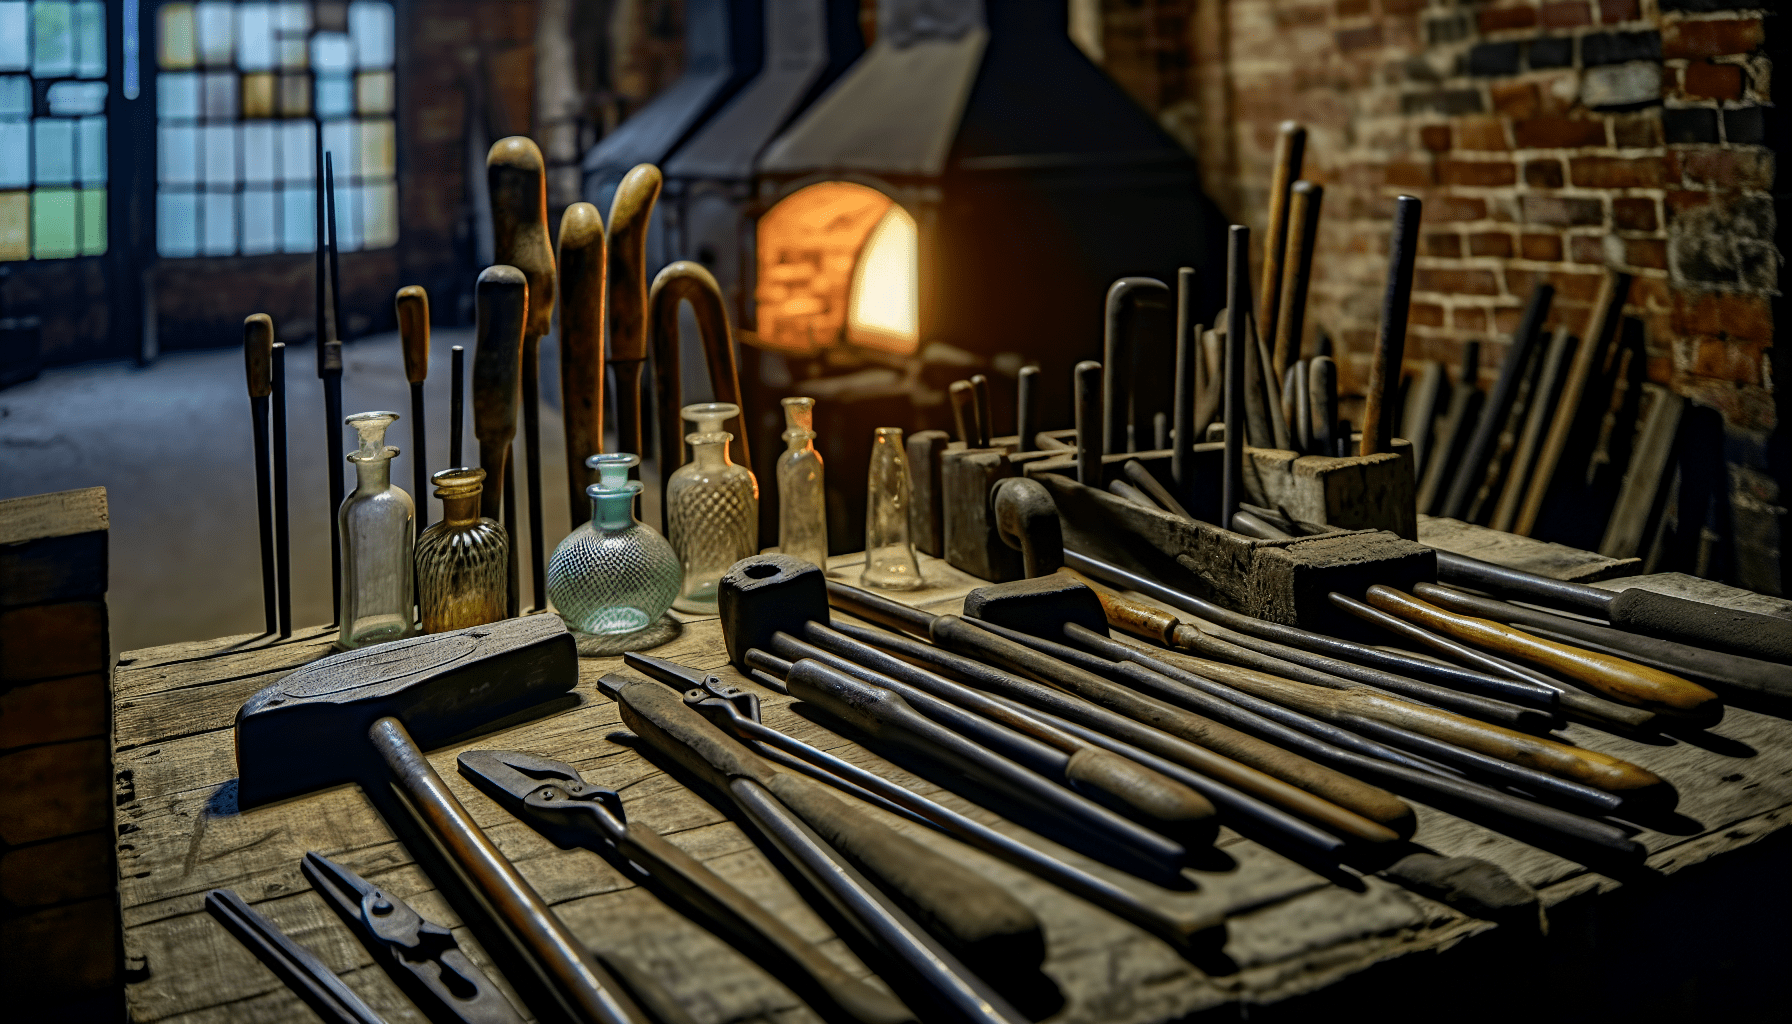 Vintage glassblowing tools and equipment used in early West Virginia glass factories